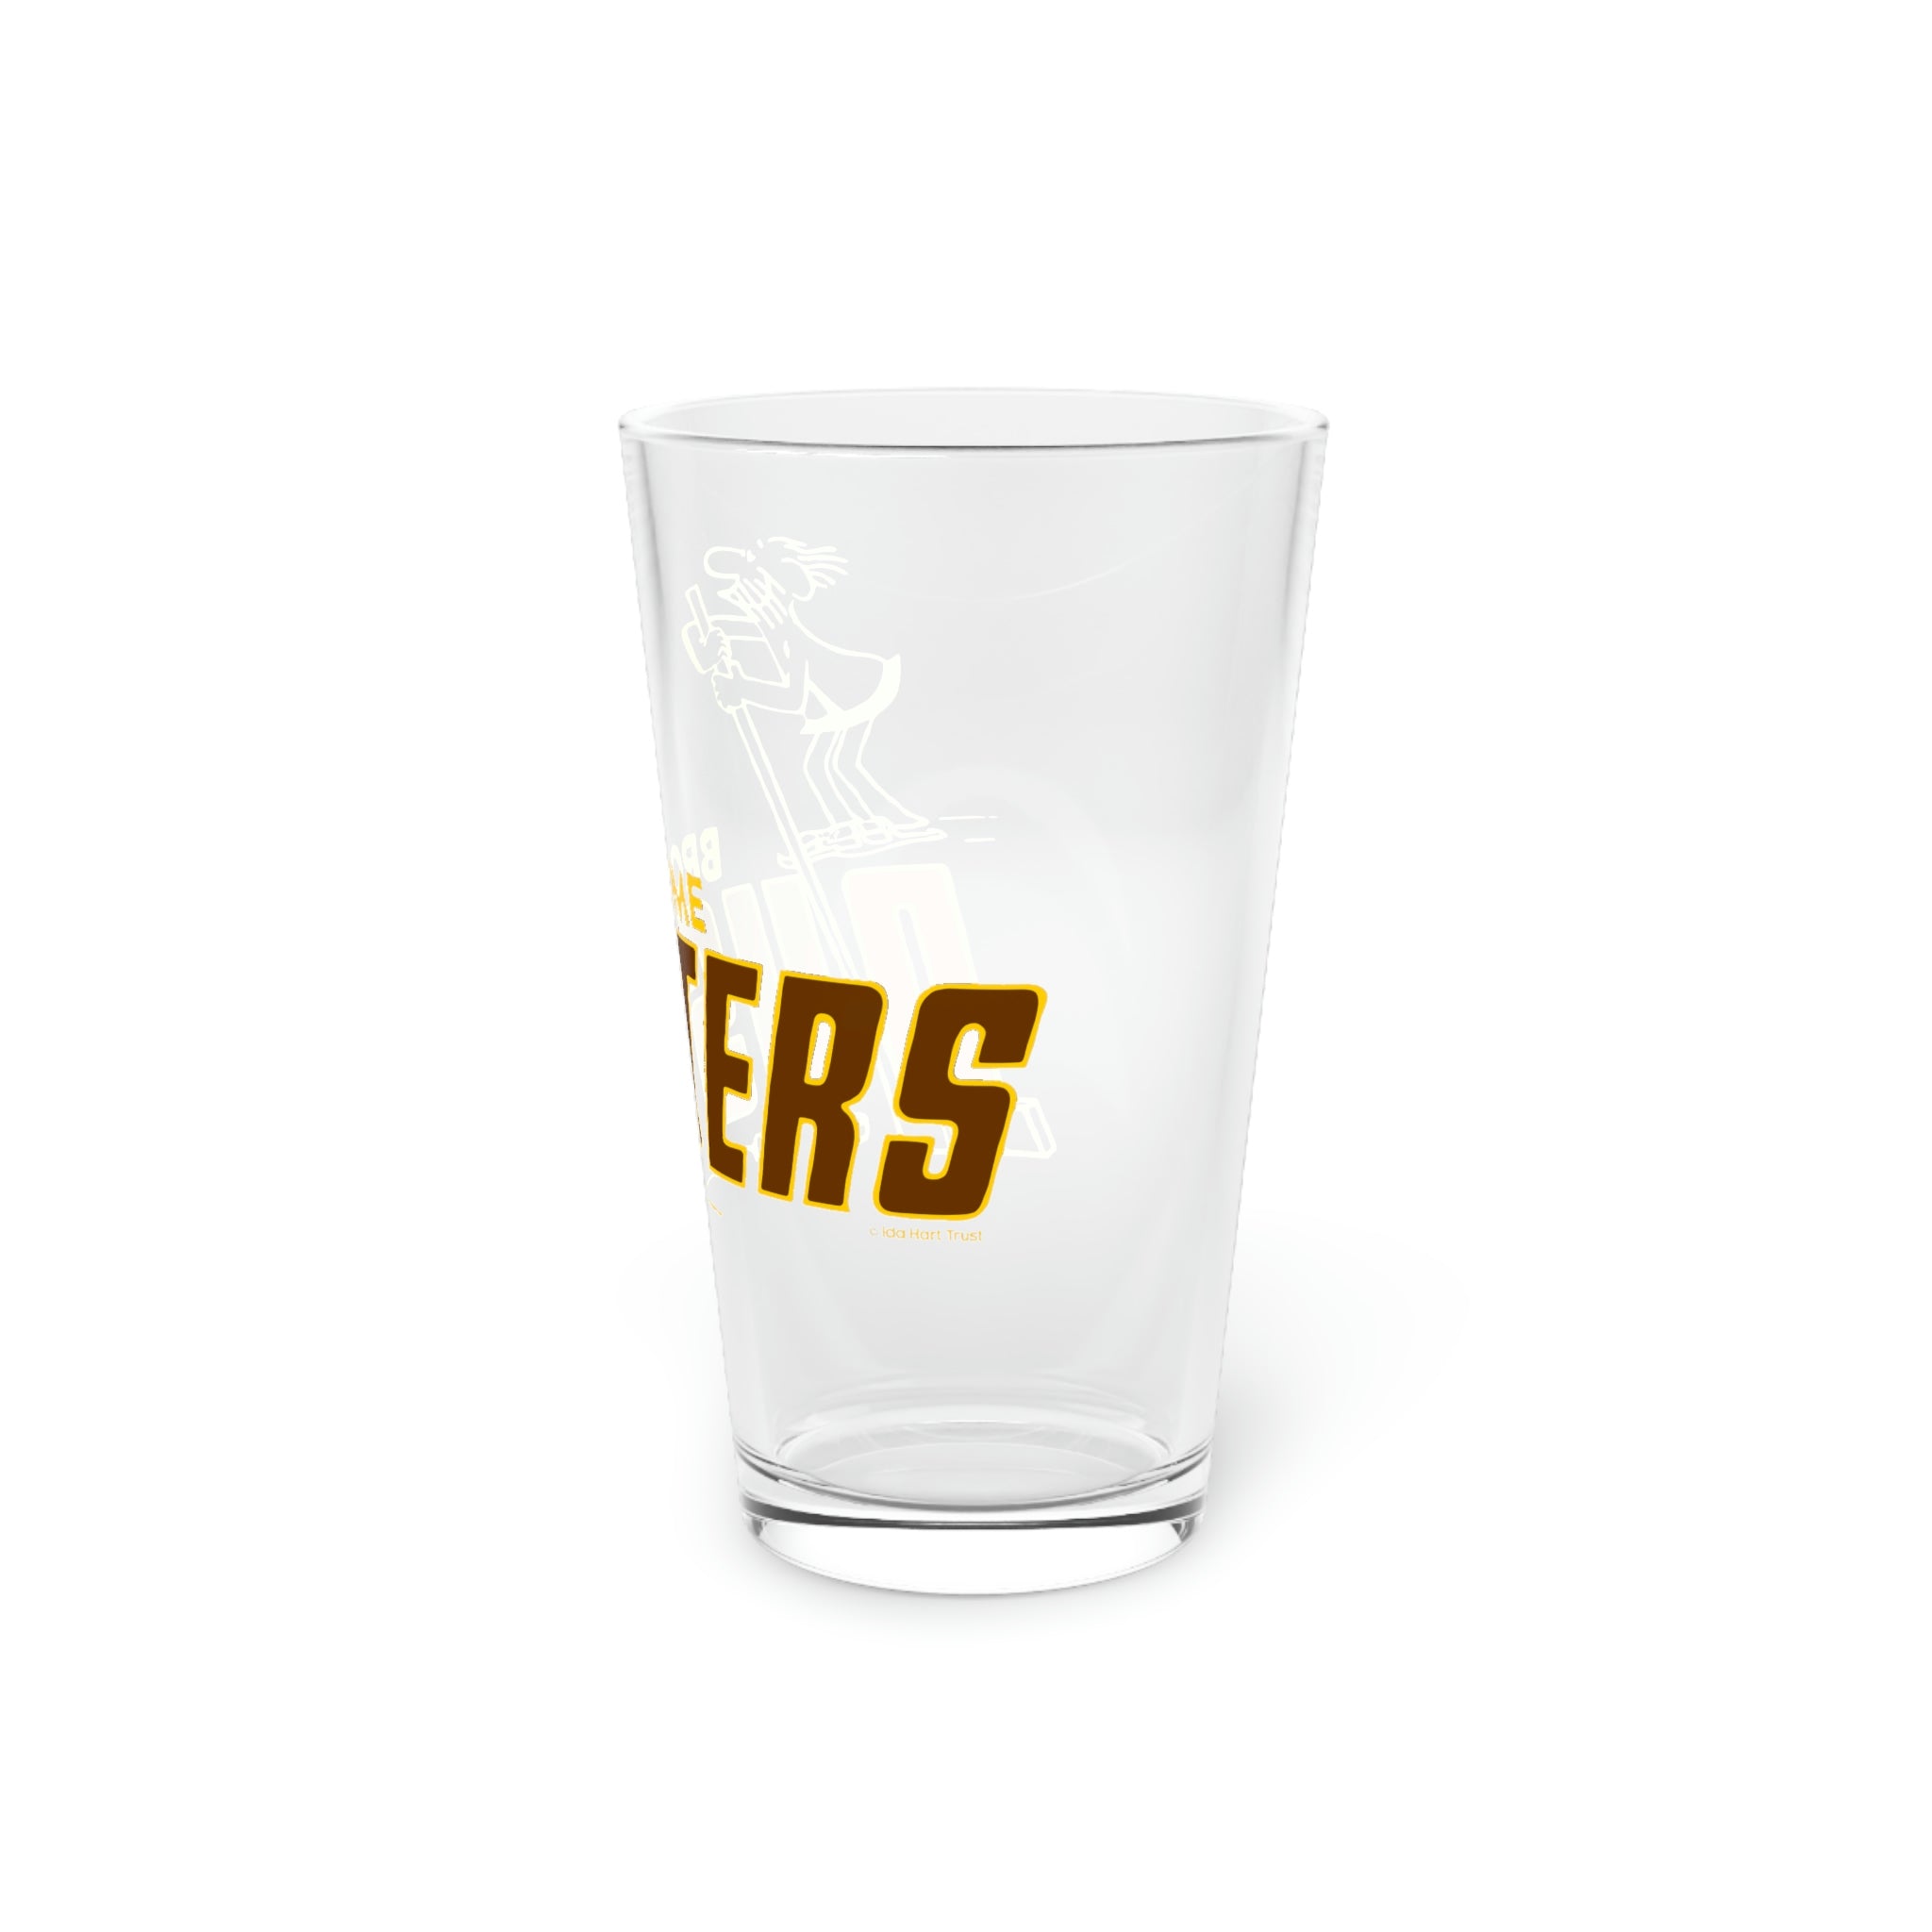 Broome Dusters™ Pint Glass